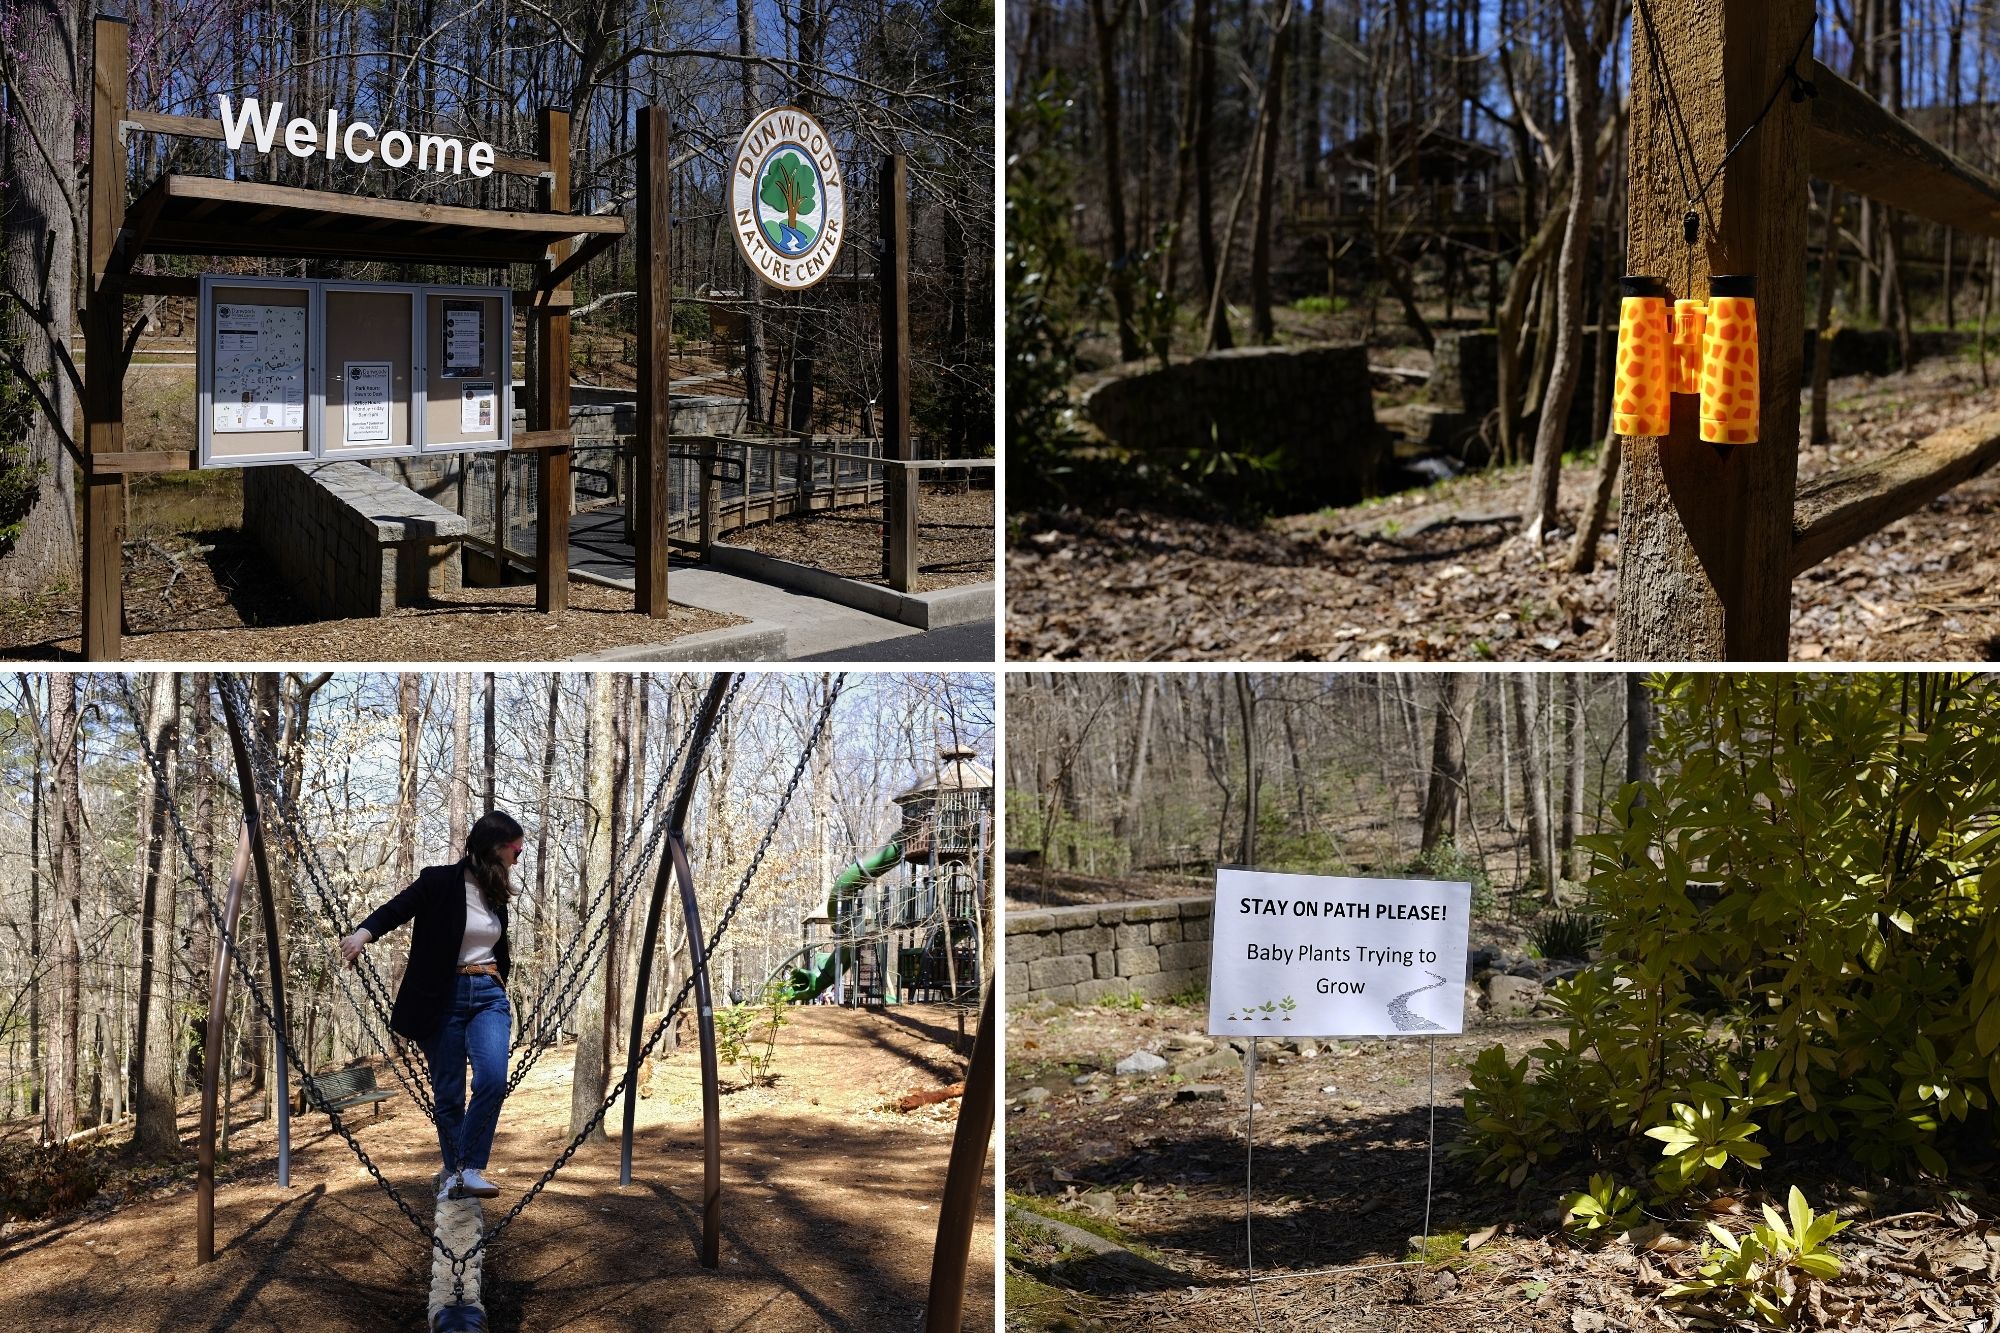 Collage: entrance to Dunwoody Nature Center, a pair of binoculars hanging from a pole, Alyssa on the playground, and a sign warning to stay on the path